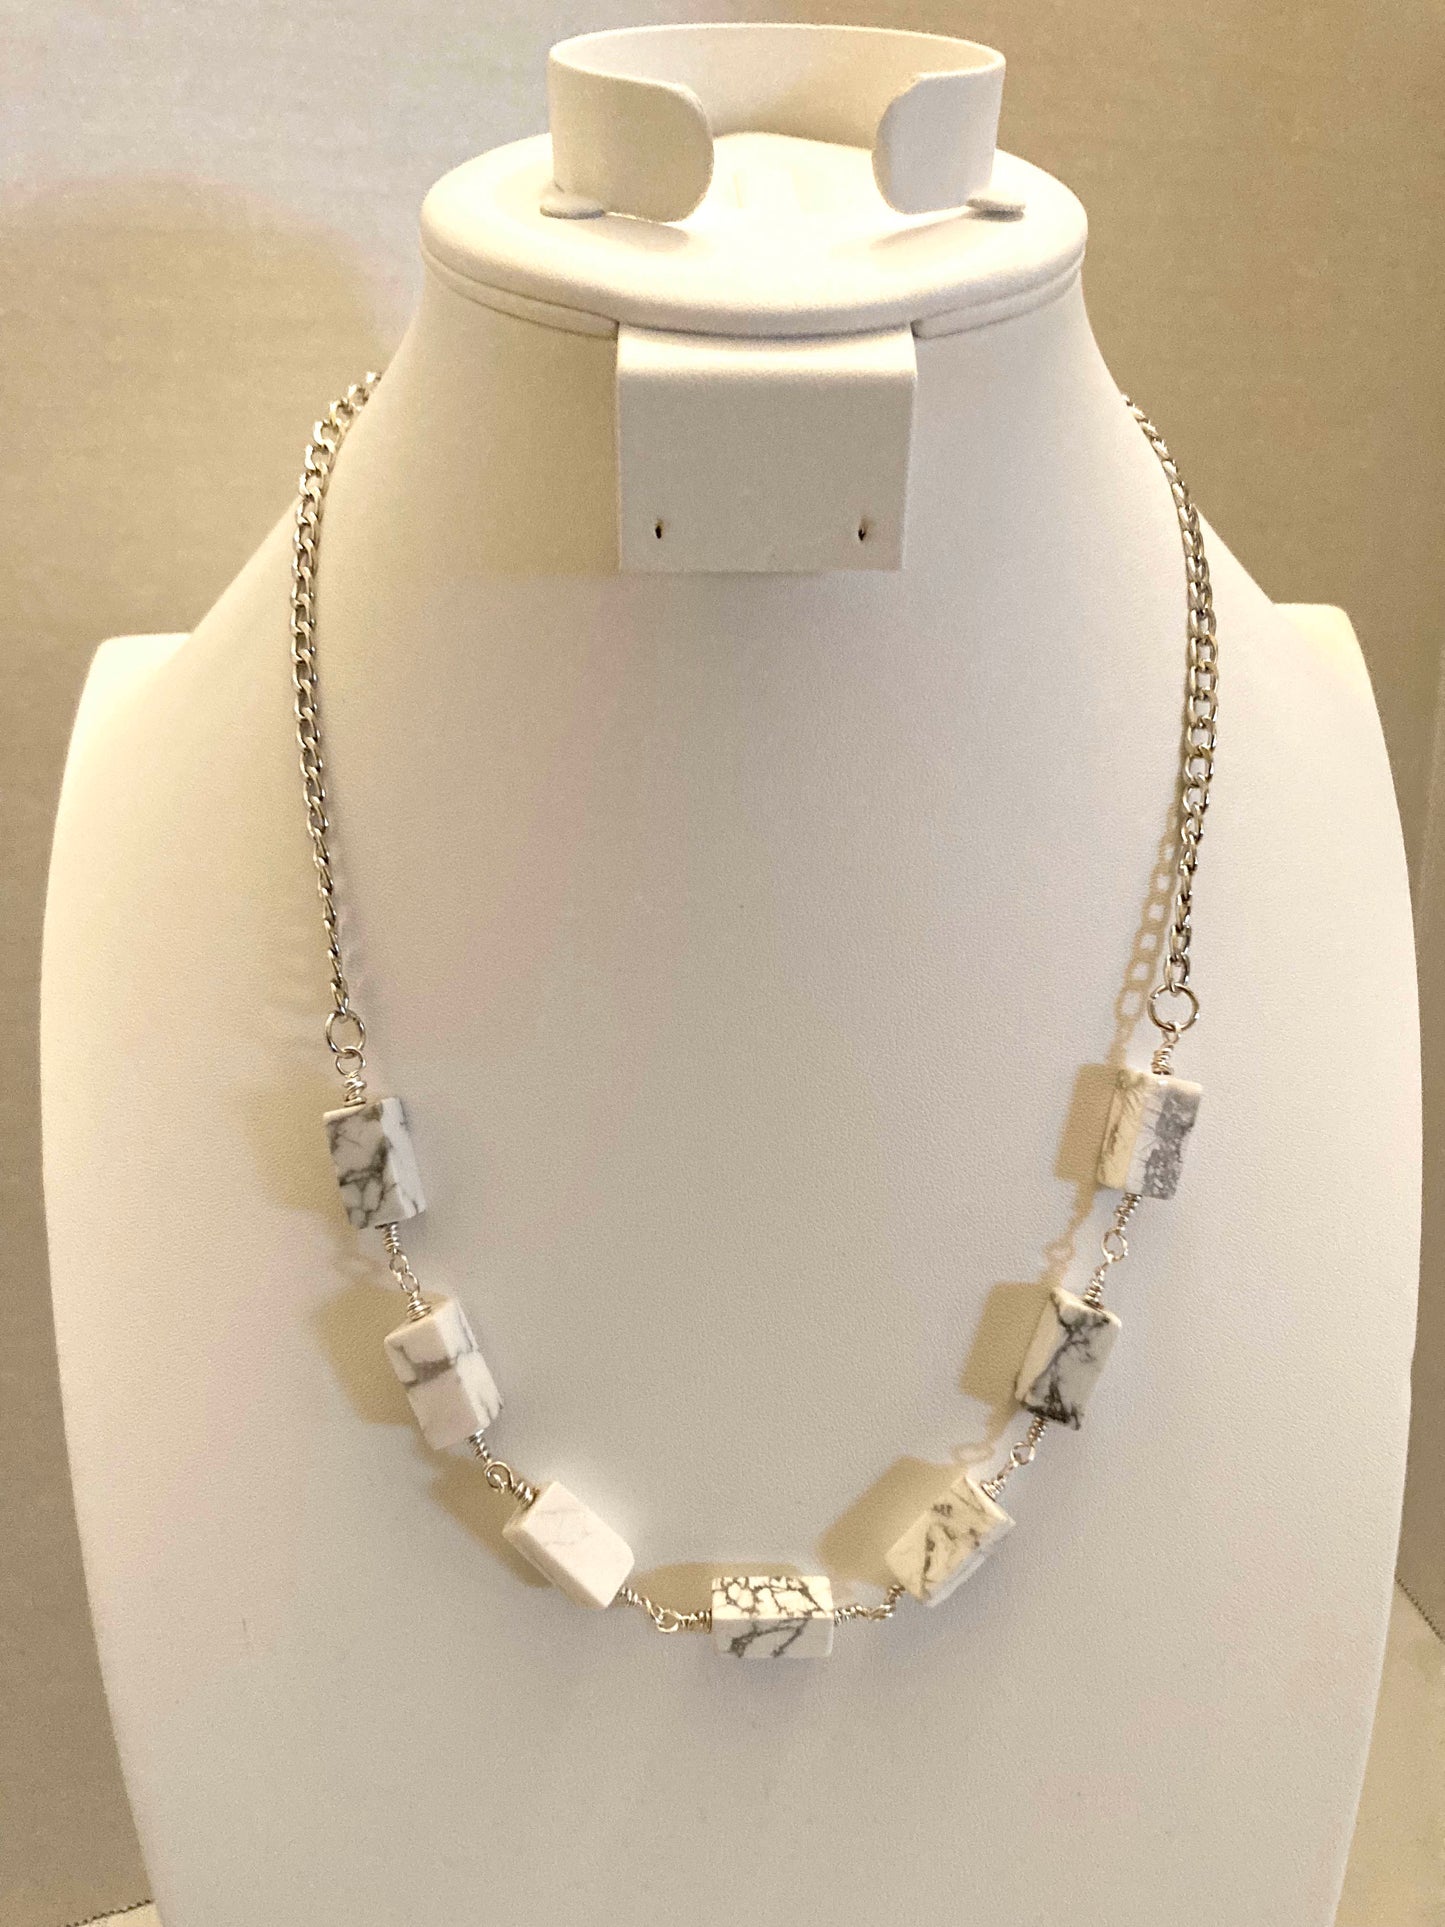 45N - White Marbled Bead Necklace